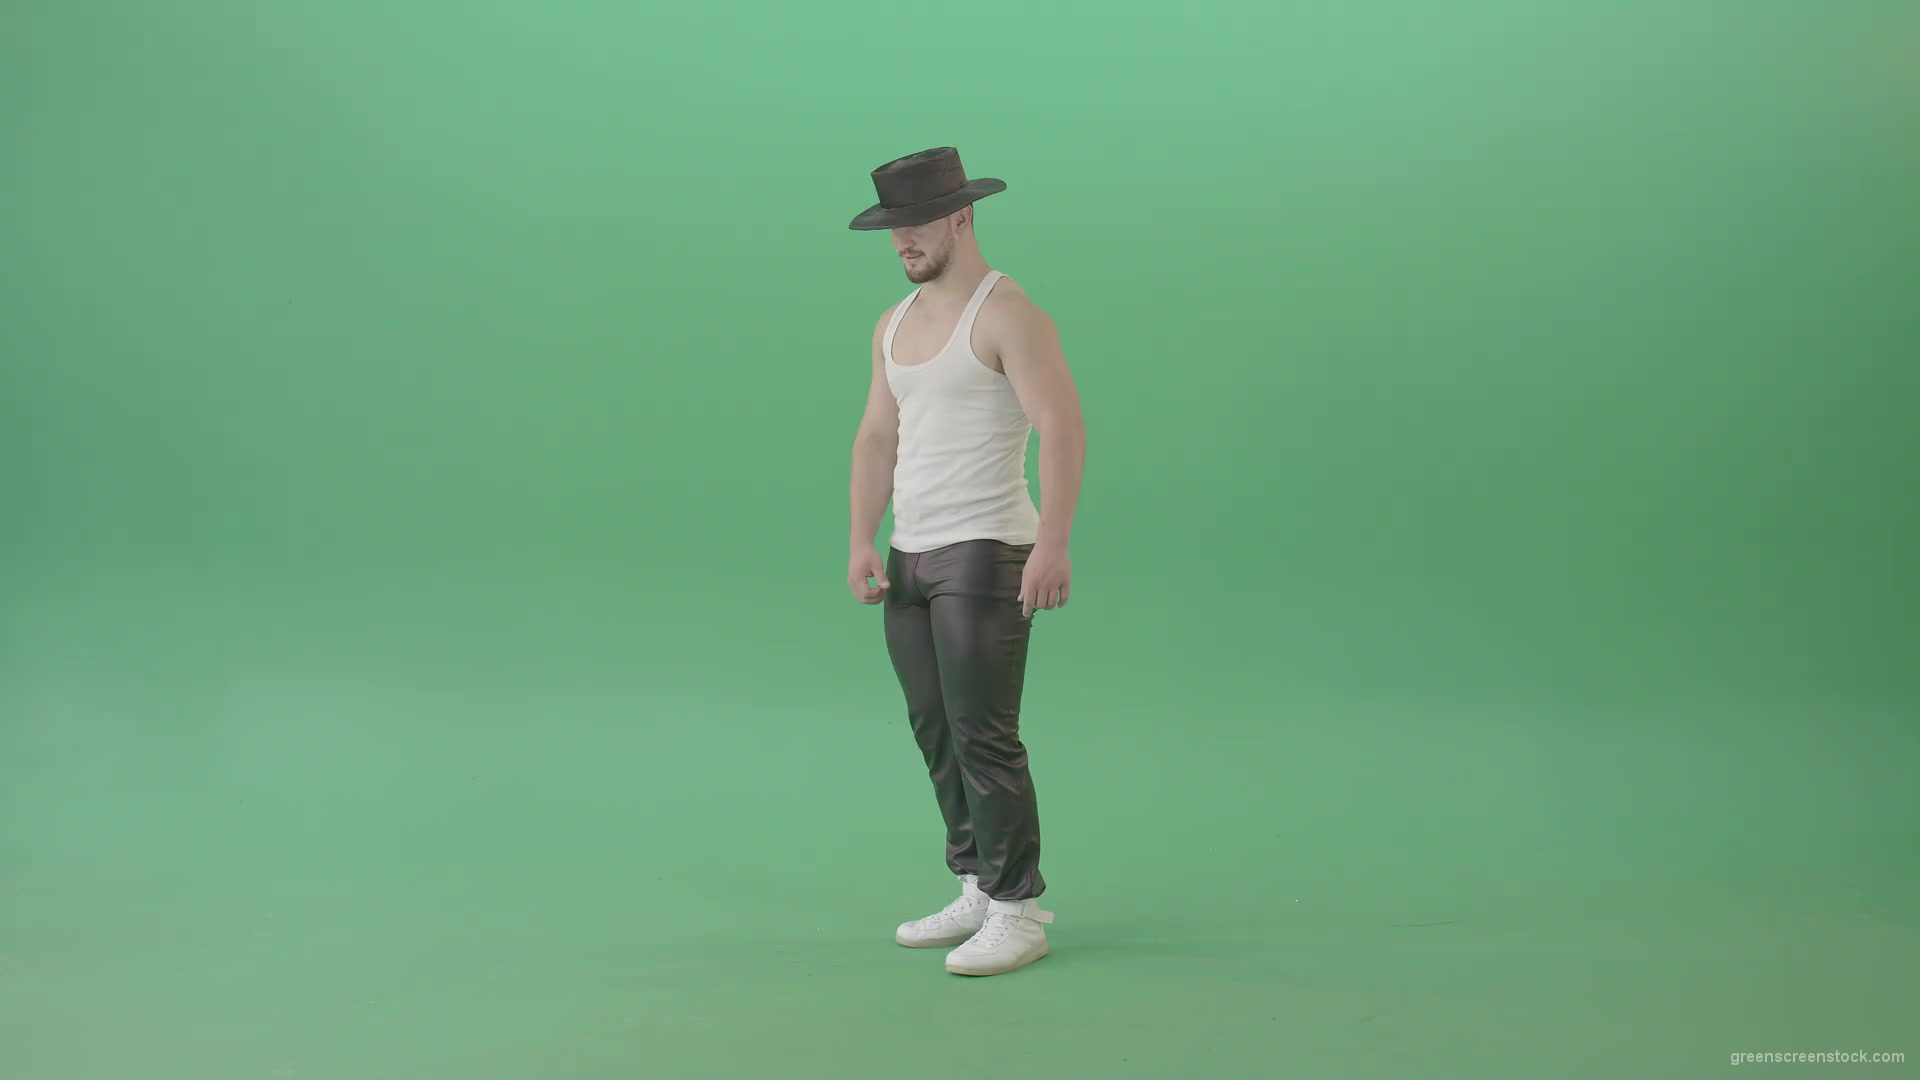 Sport-Man-in-black-hat-dancing-and-marching-fast-isolated-over-Green-Screen-4K-Video-Footage-1920_001 Green Screen Stock